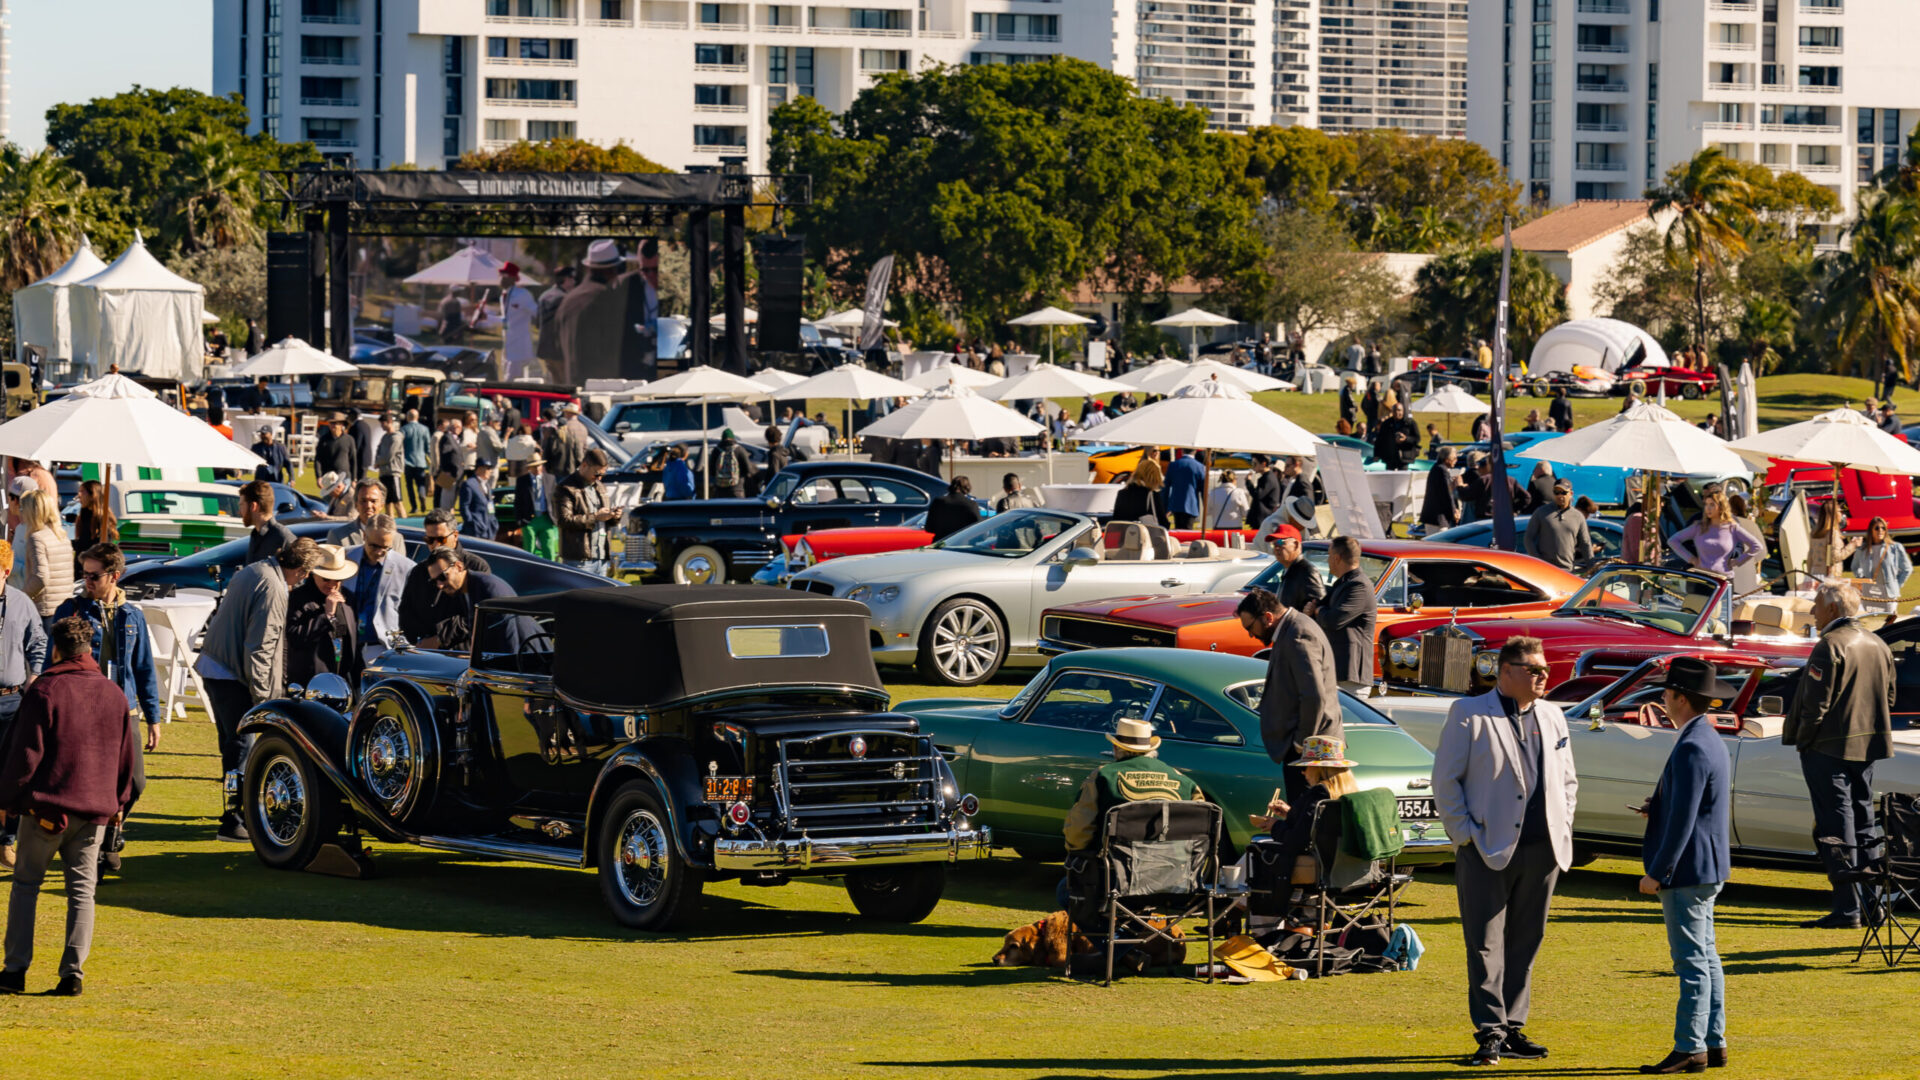 Motorcar Cavalcade Concours d’Elegance returns to Miam with over 100 collectible cars at thebat the renowned JW Marriott Turnberry Resort & Spa